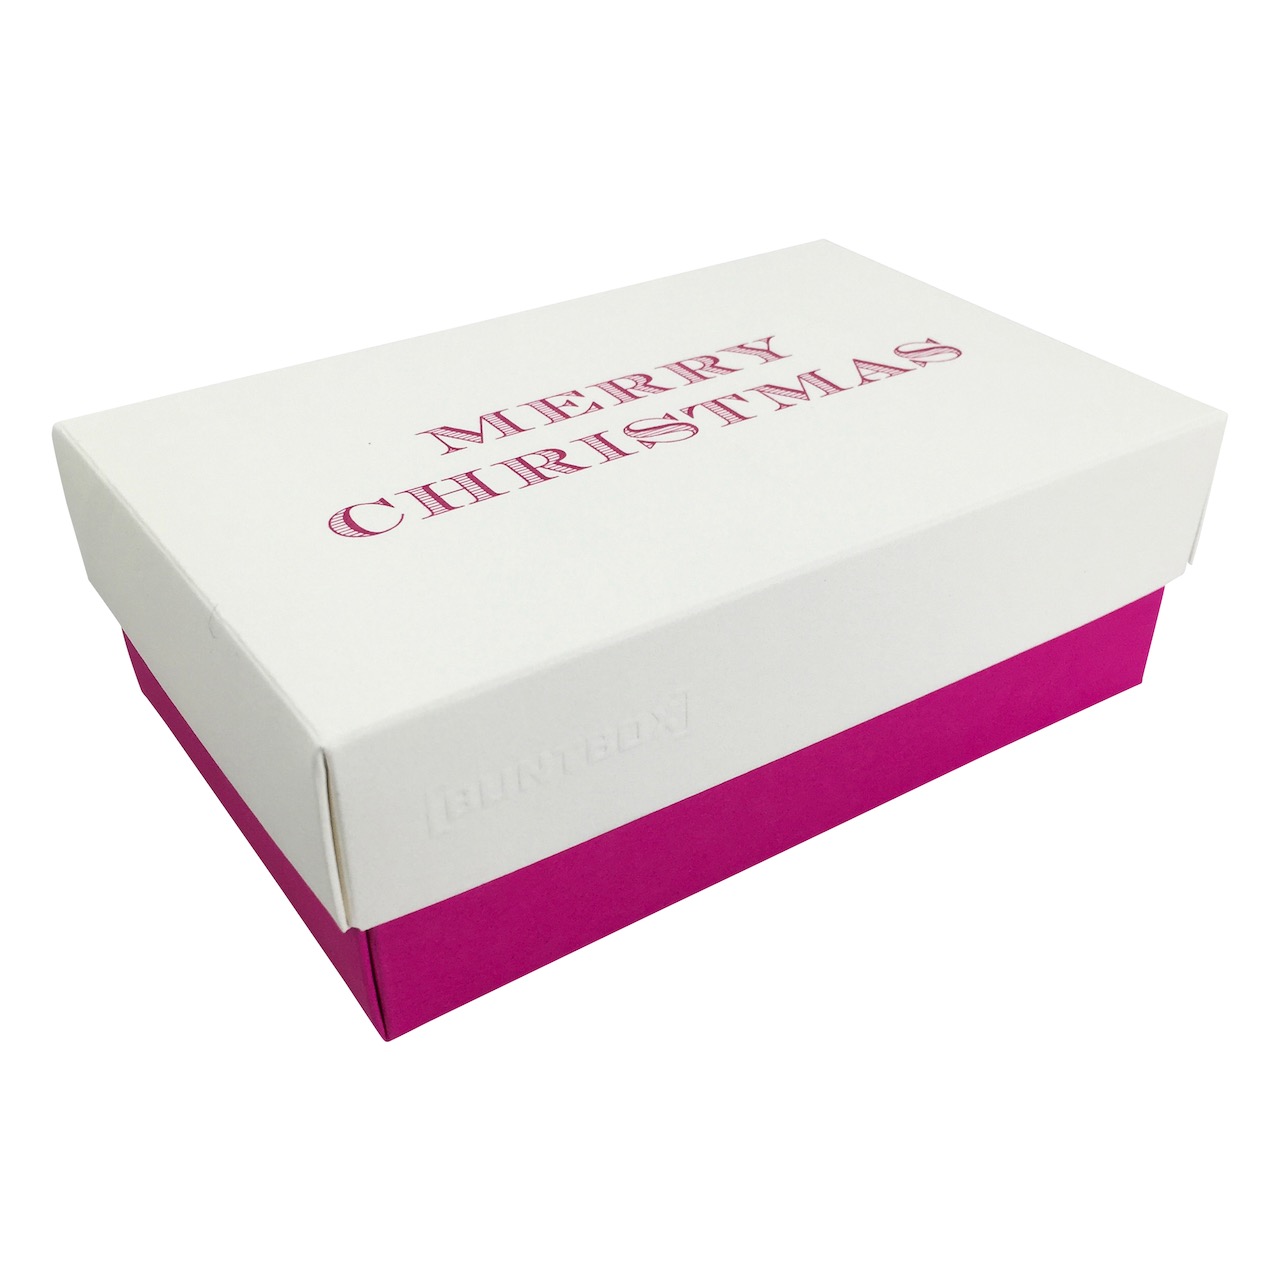 Buntbox L Fine Paper Christmas in Champagner-Magenta